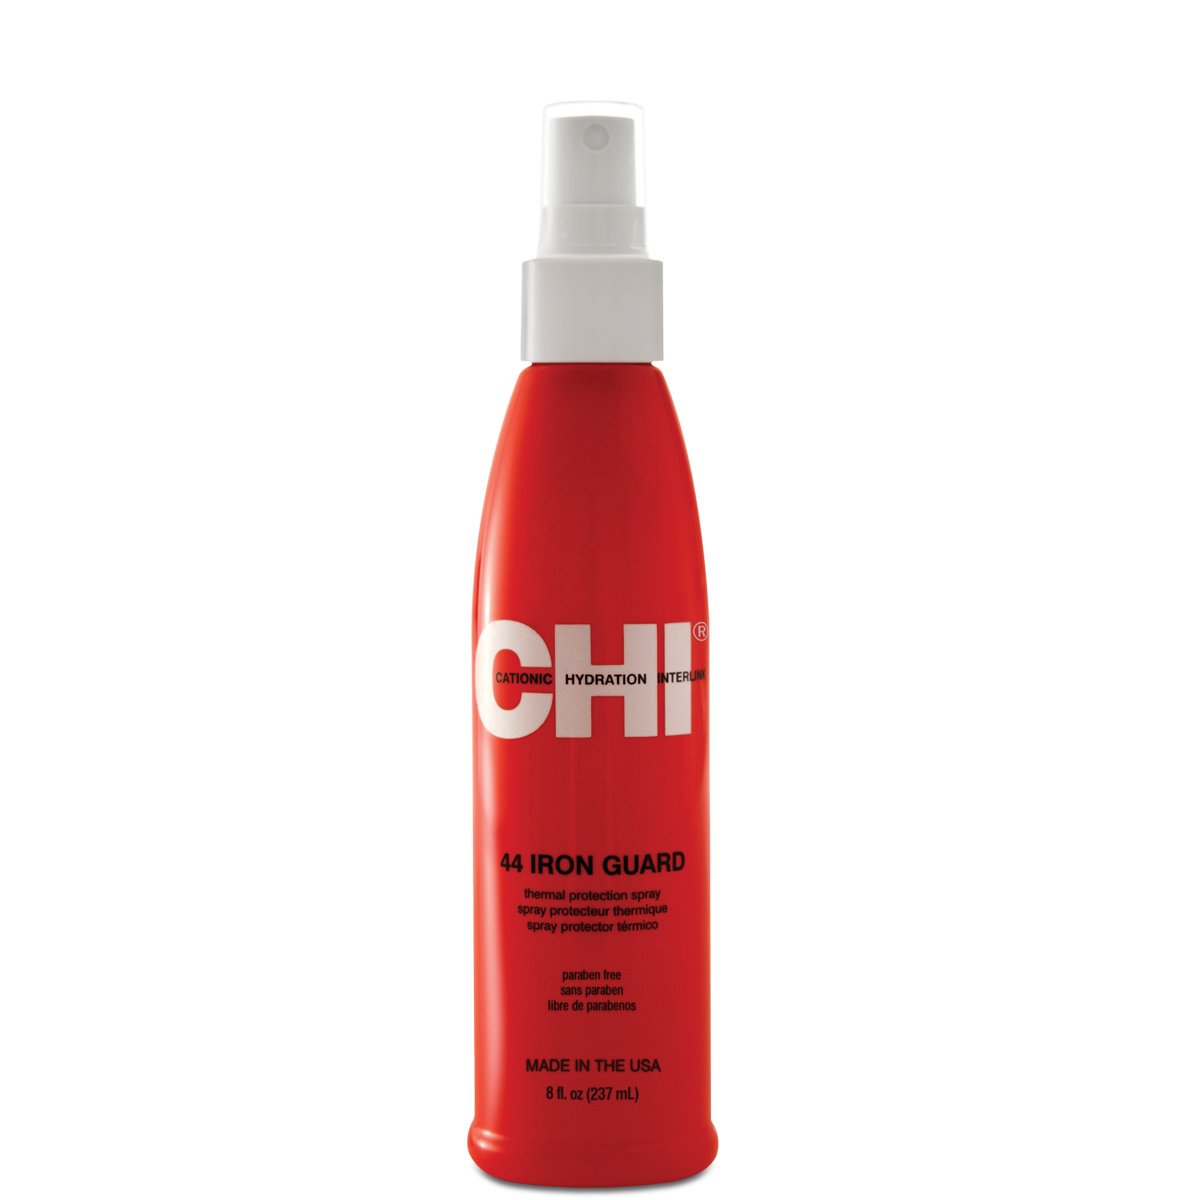 CHI - 44 Iron Guard - Thermal Protection Spray - 59 ml